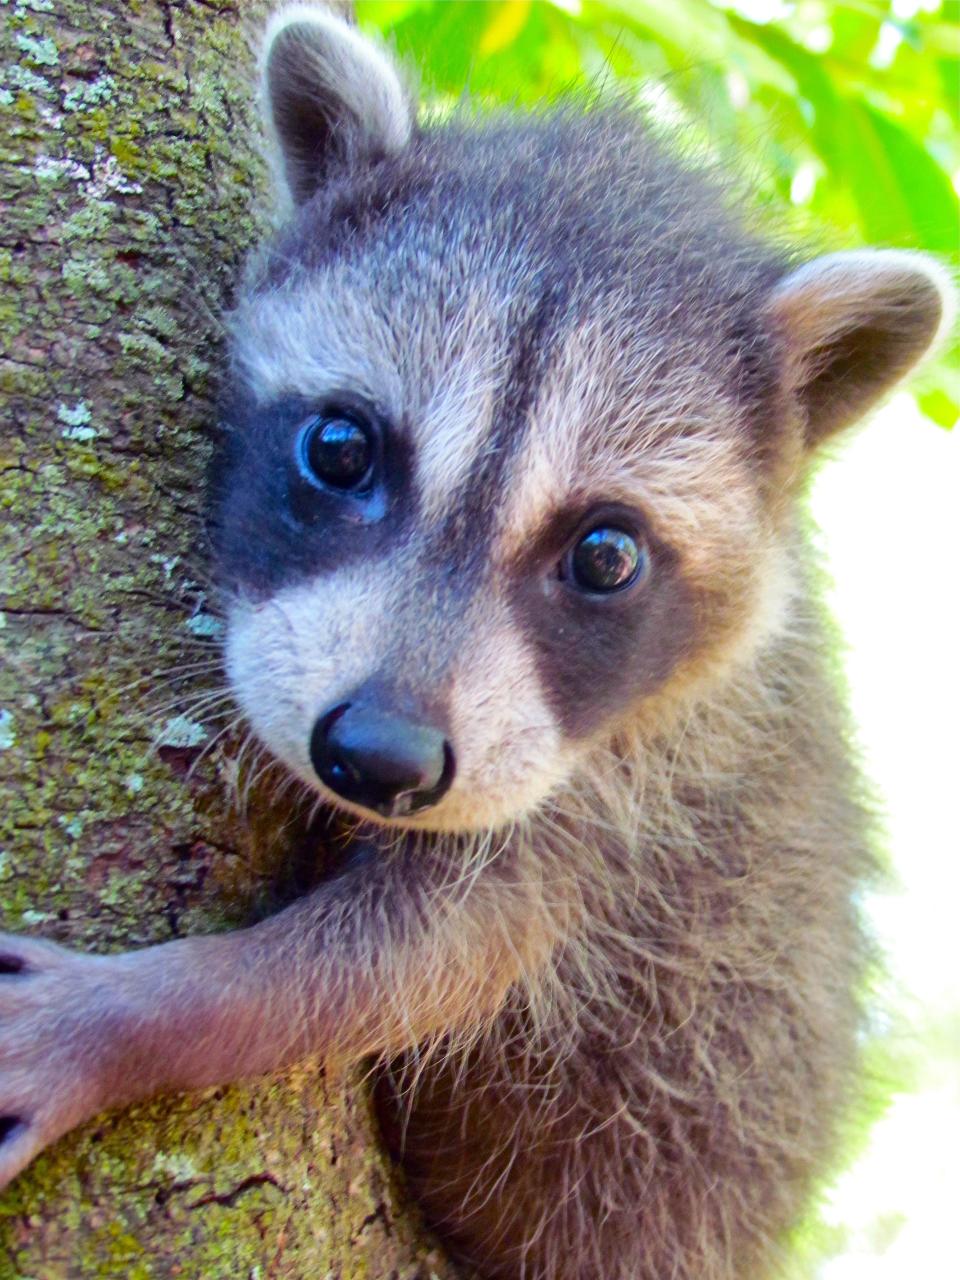 Never handle baby raccoons or other possible rabies vectors. Call St. Francis Wildlife.